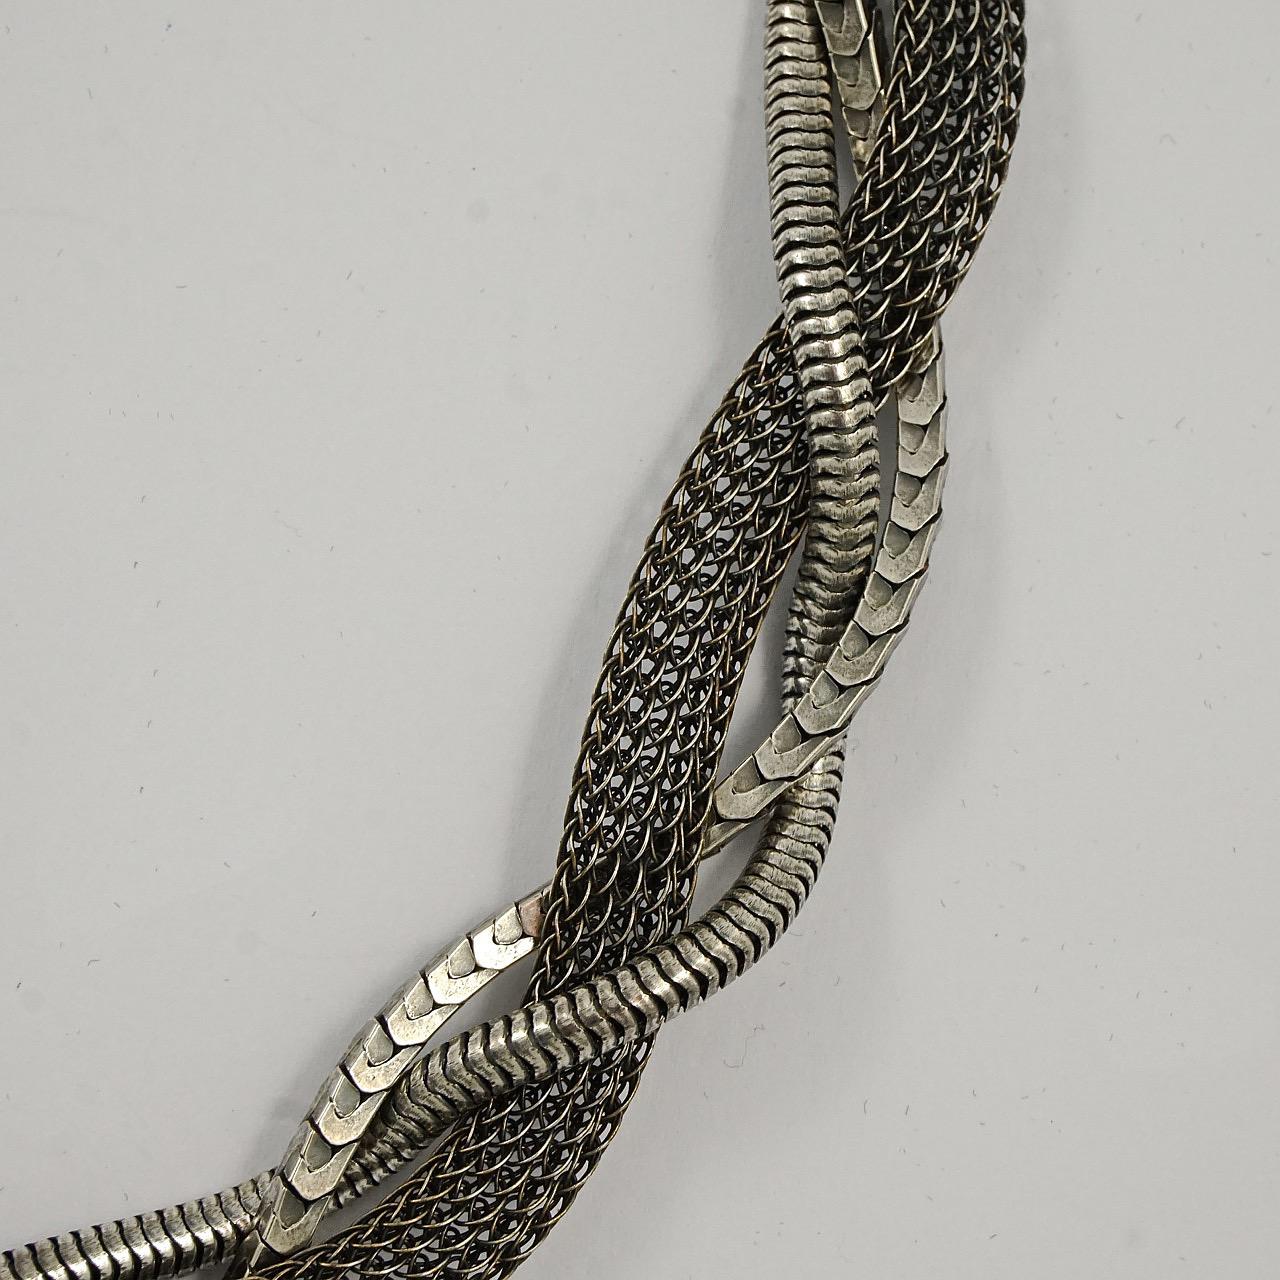 Ermani Bulatti antiqued silver tone necklace, with three chains woven through each other, in mesh, snake and an unusual box chain design. It has a large ring bolt clasp. The necklace is length 42cm / 16.5 inches with an extension of 11cm / 4.3